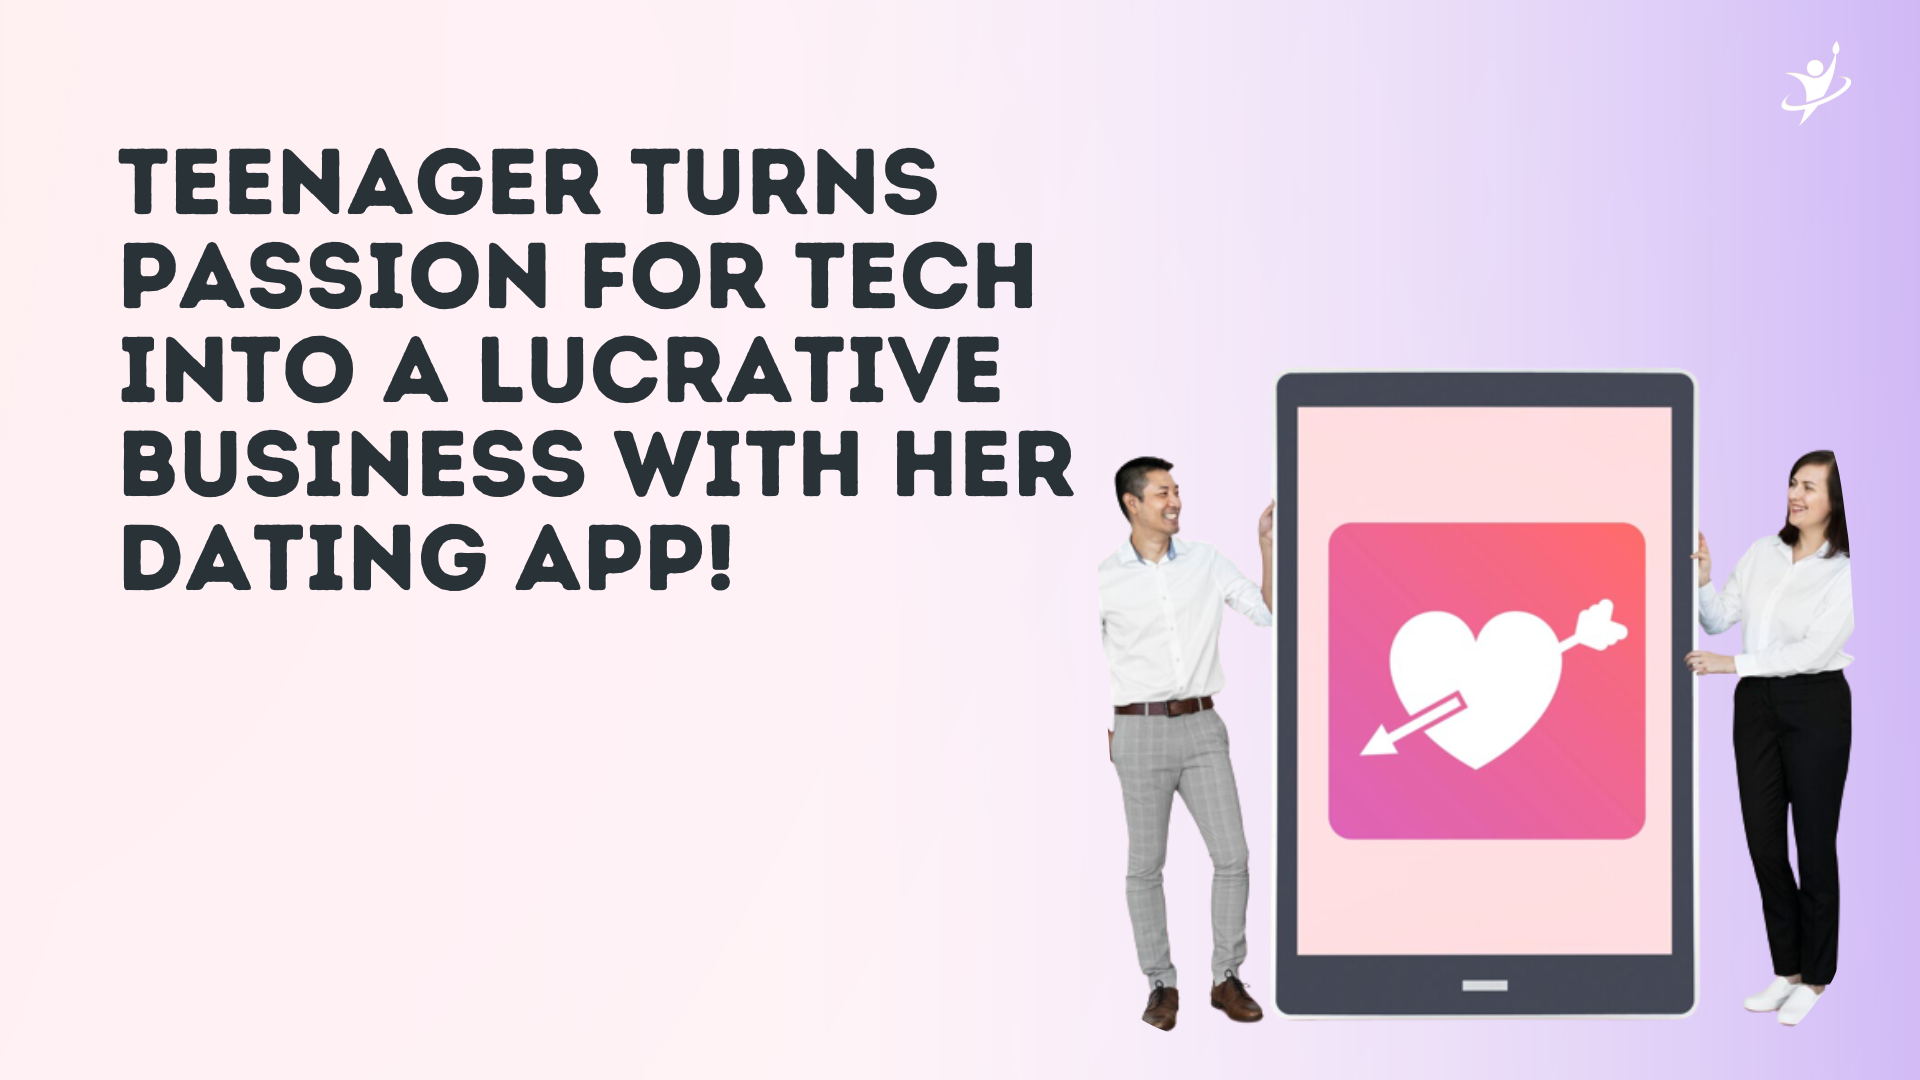 Teenager Turns Passion for Tech into a Lucrative Business with Her Dating App